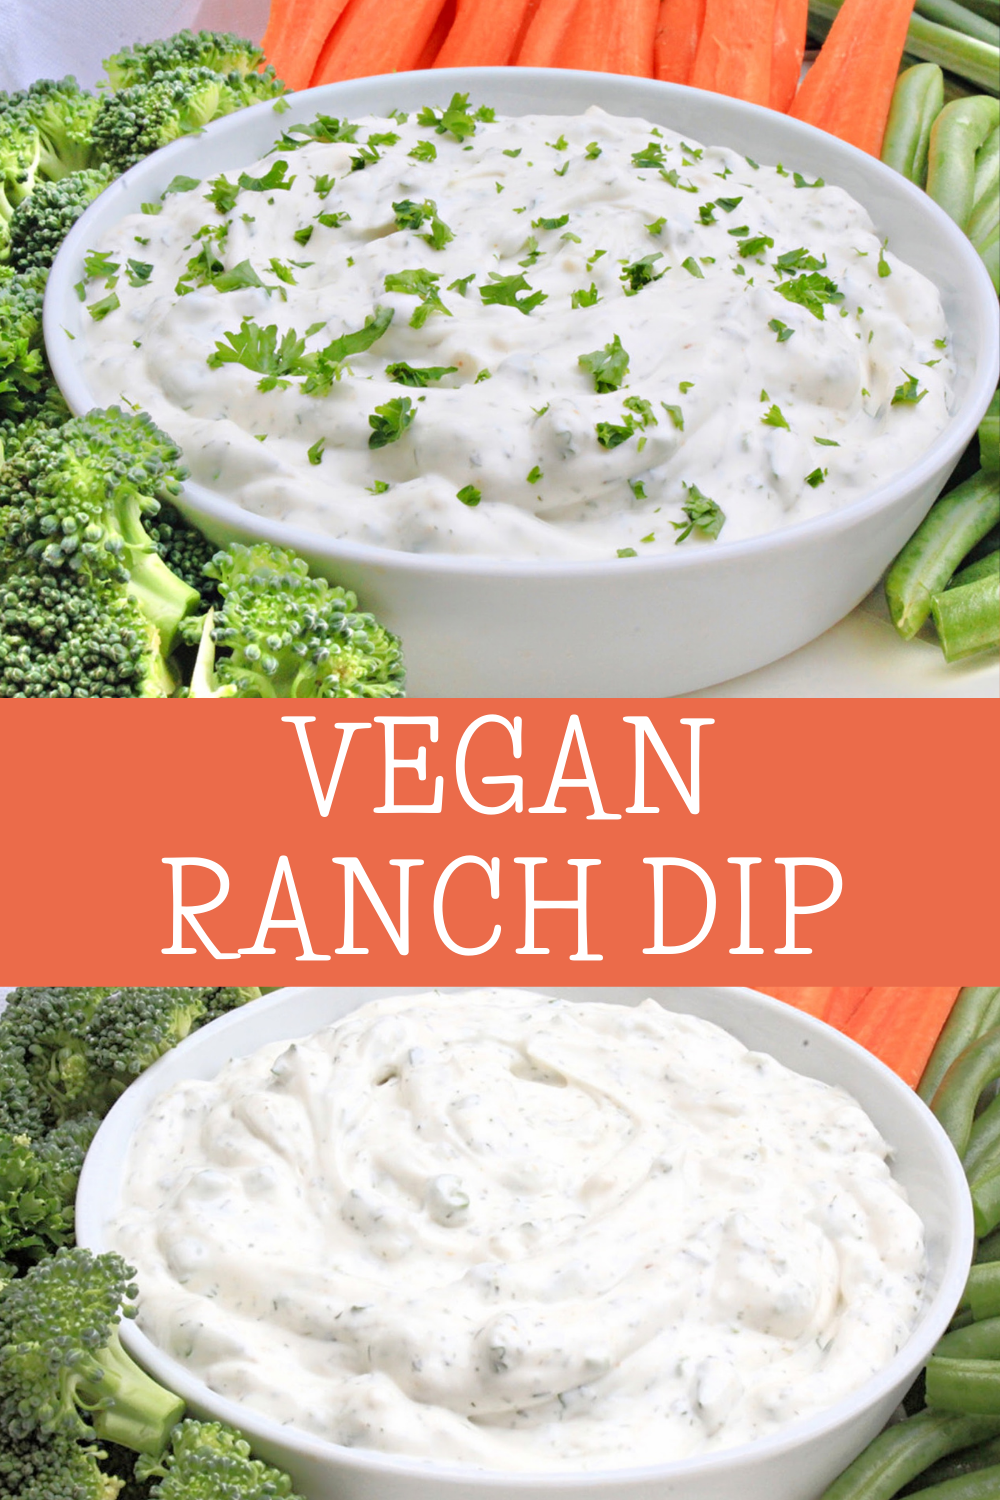 Vegan Ranch Dip ~ The classic party dip! Dairy-free ranch dip is easy, creamy, and perfect for parties, game days, and everyday snacking at home! via @thiswifecooks